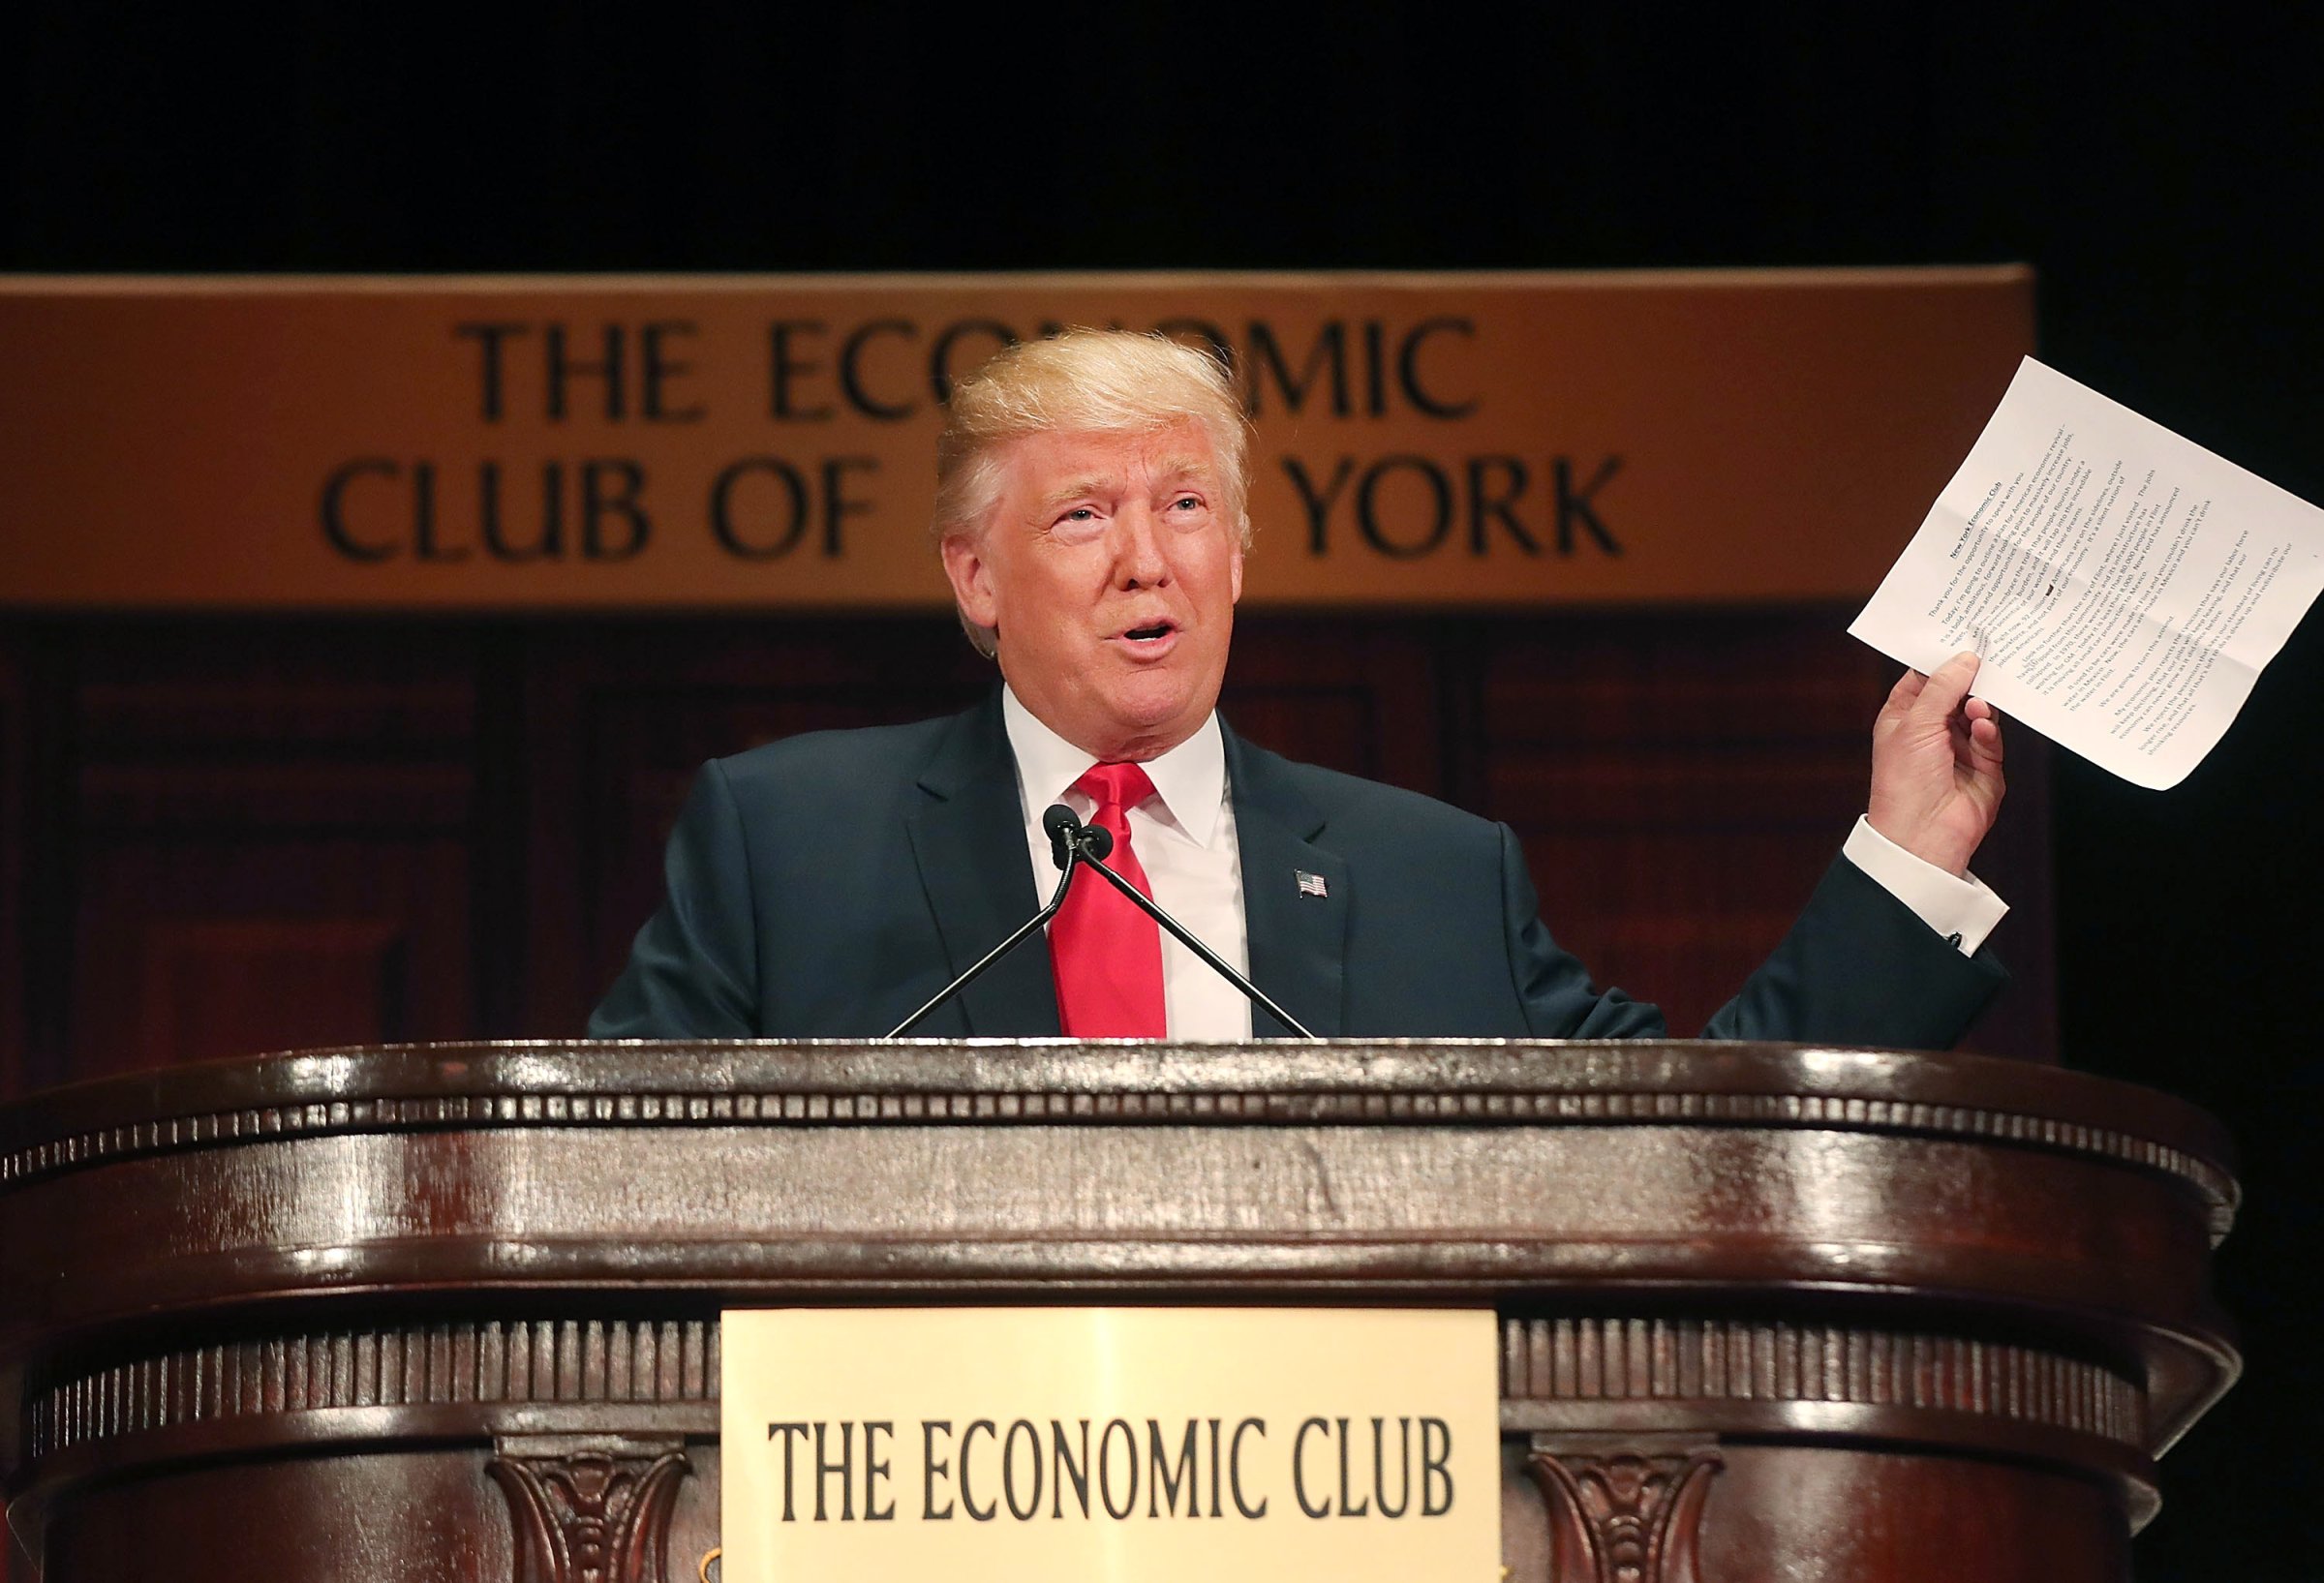 Presidential Candidate Donald Trump Speaks At The Economic Club Of New York